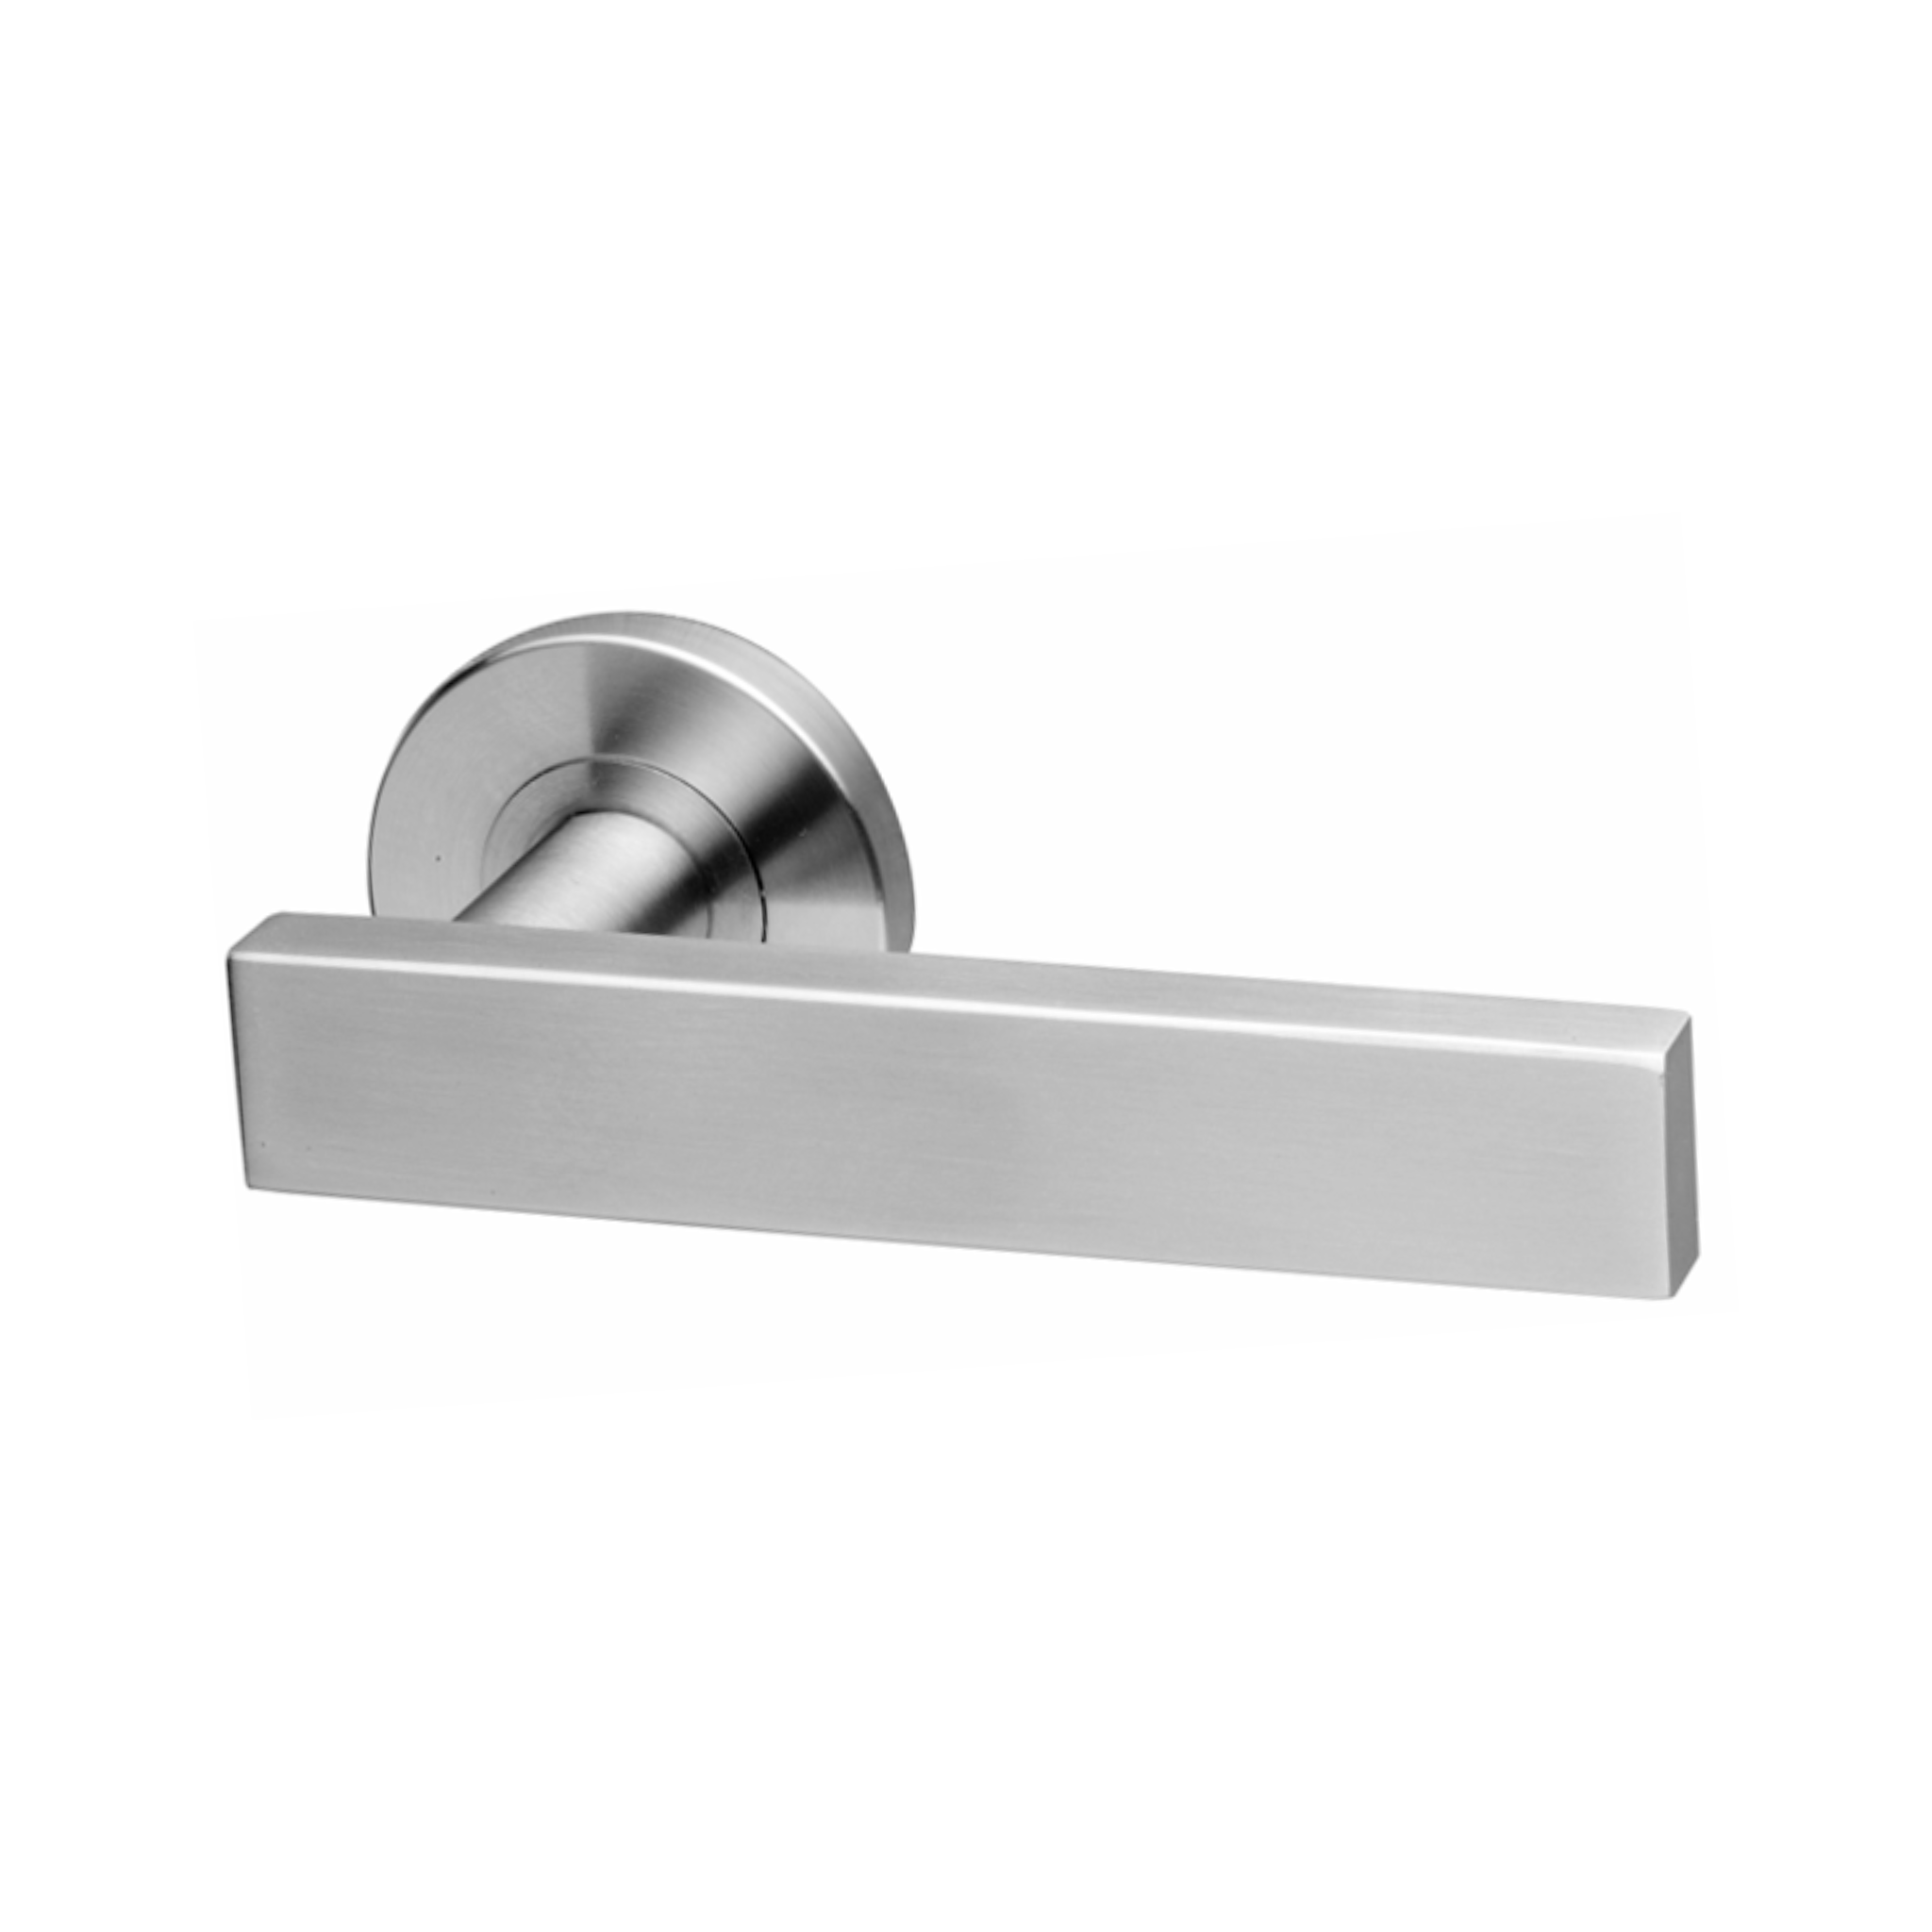 Lahti Round, Lever Handles, Solid, On Round Rose, With Escutcheons, Stainless Steel, QS